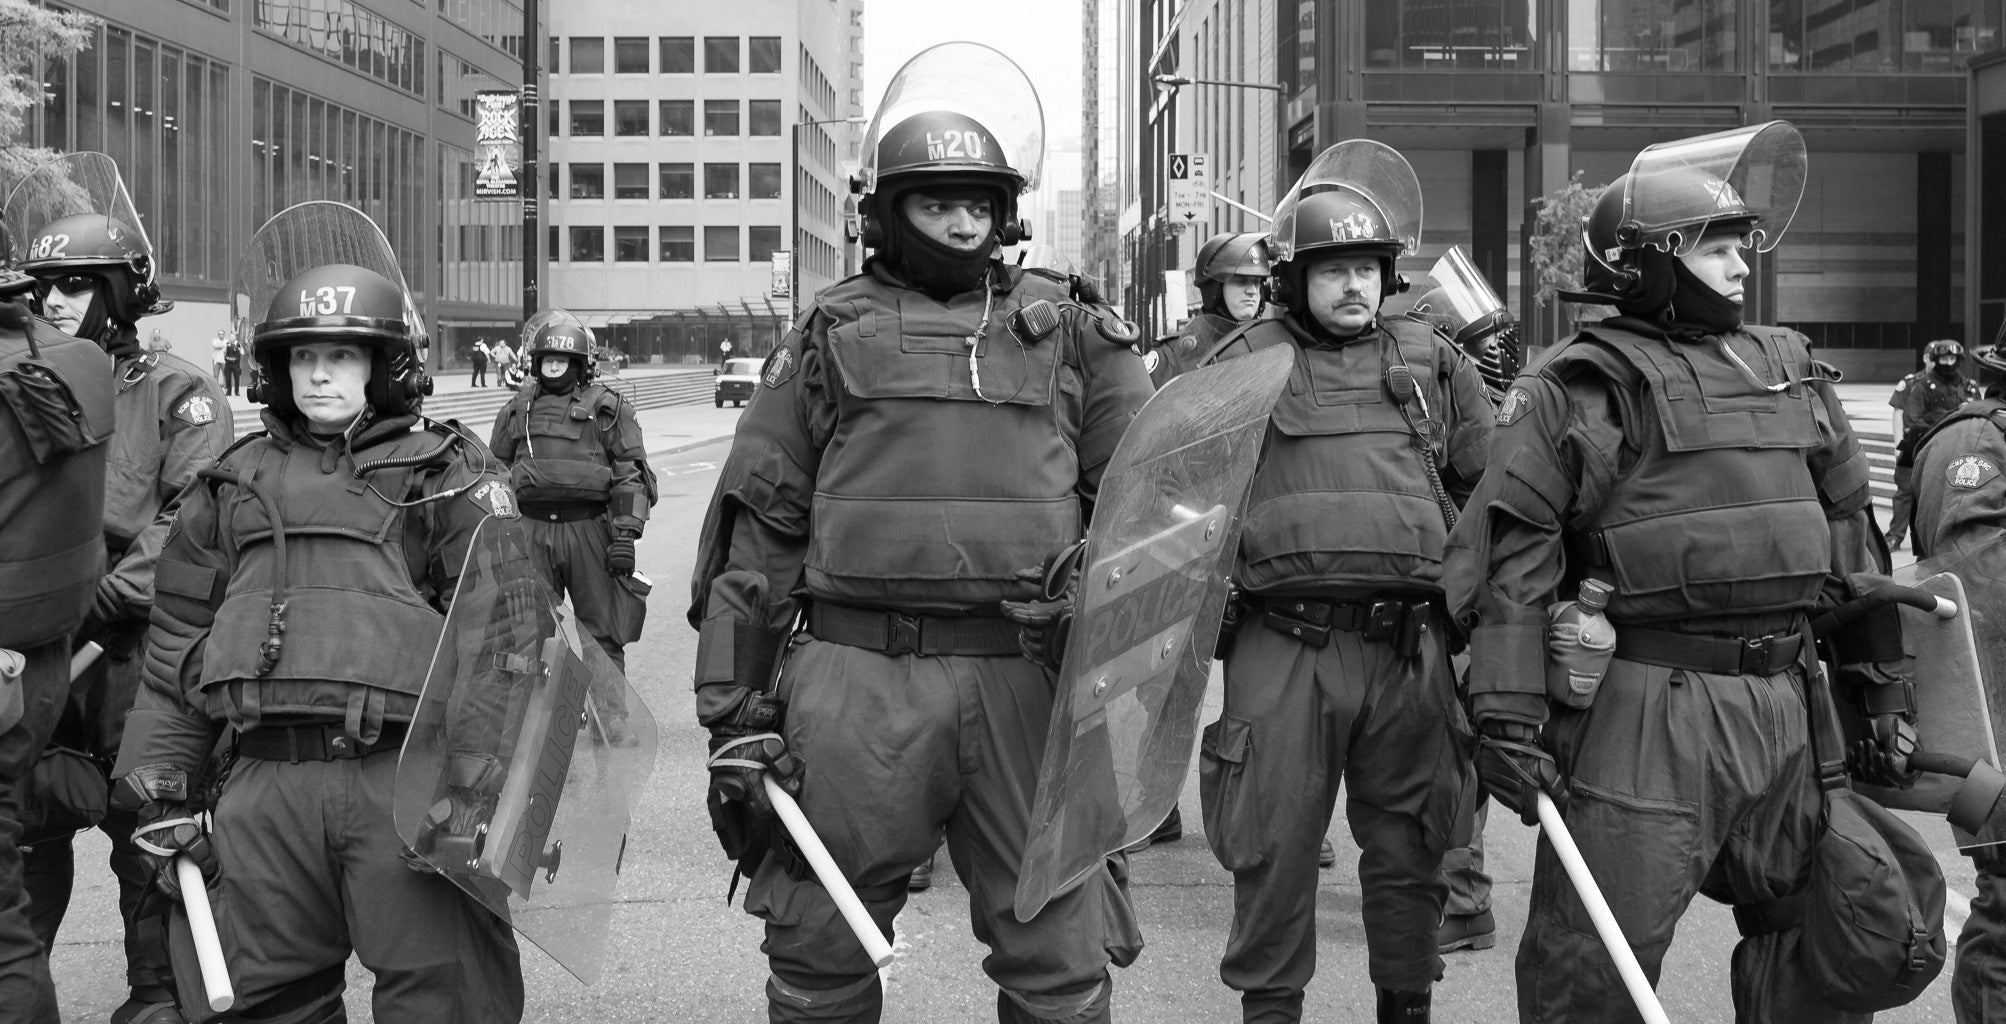 ic:G20 Protests Riot Police Toronto Canada